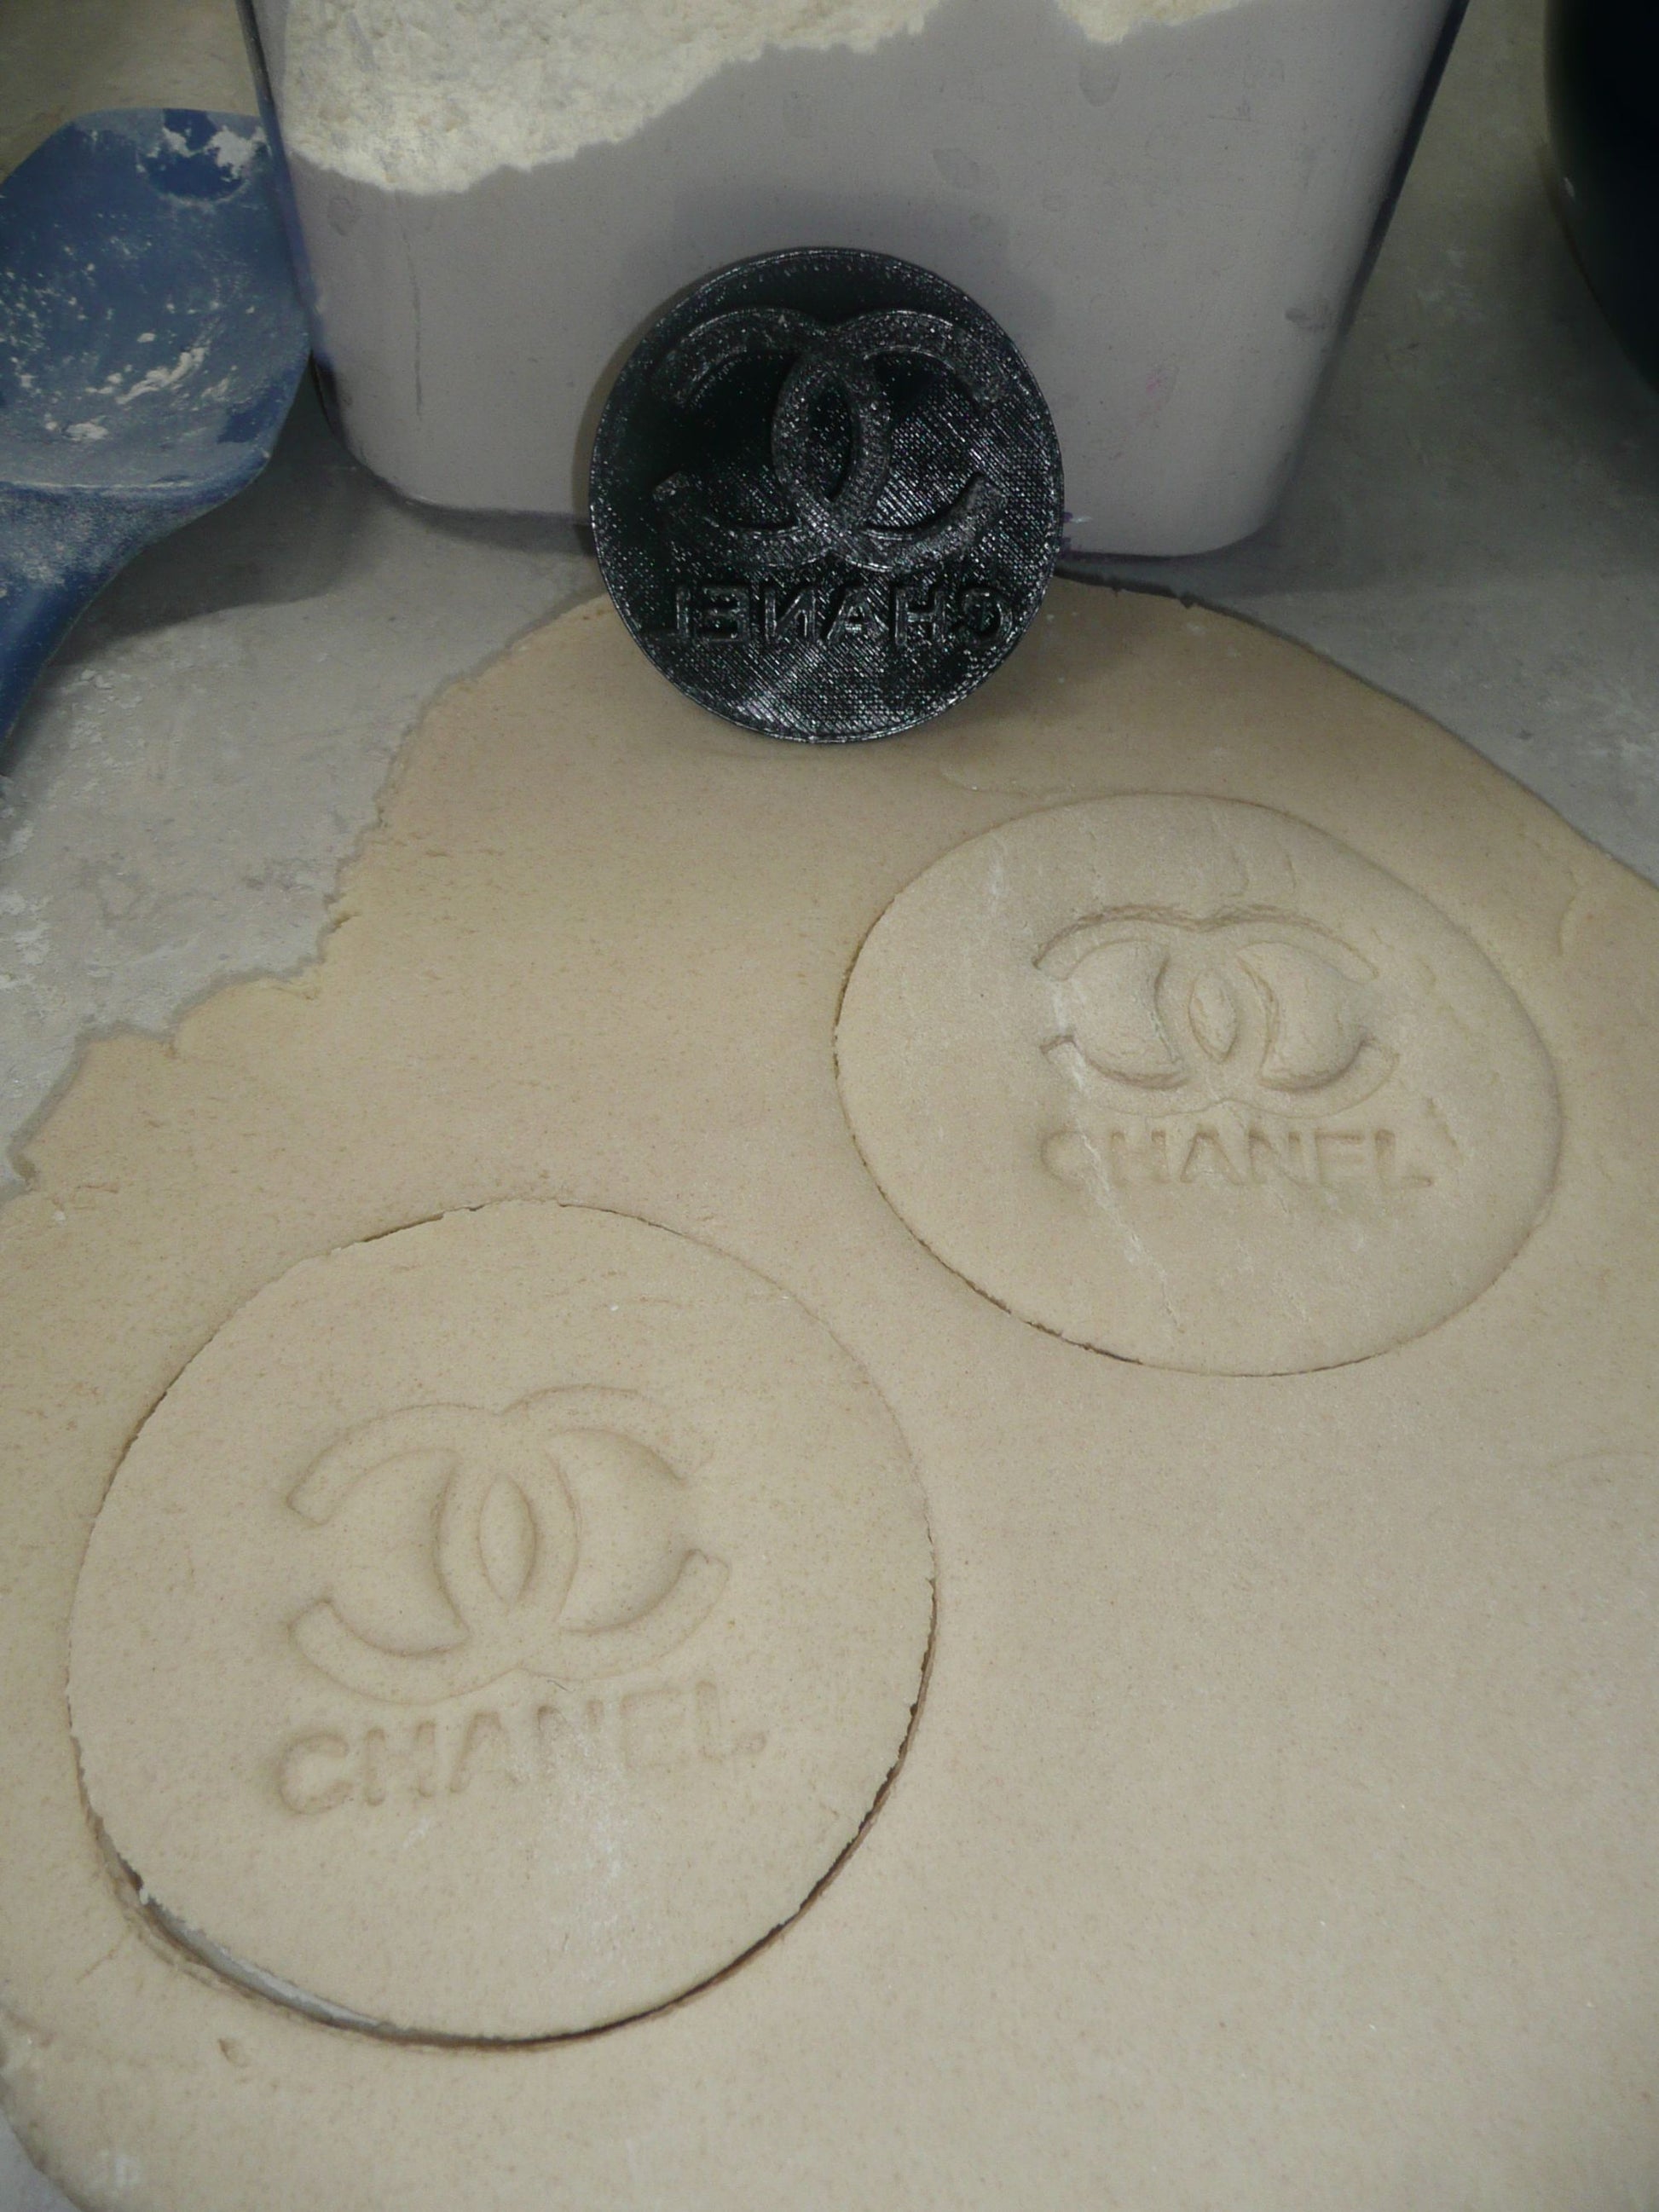 Gucci, Louis Vuitton and Channel, cookie or plasticine stamps